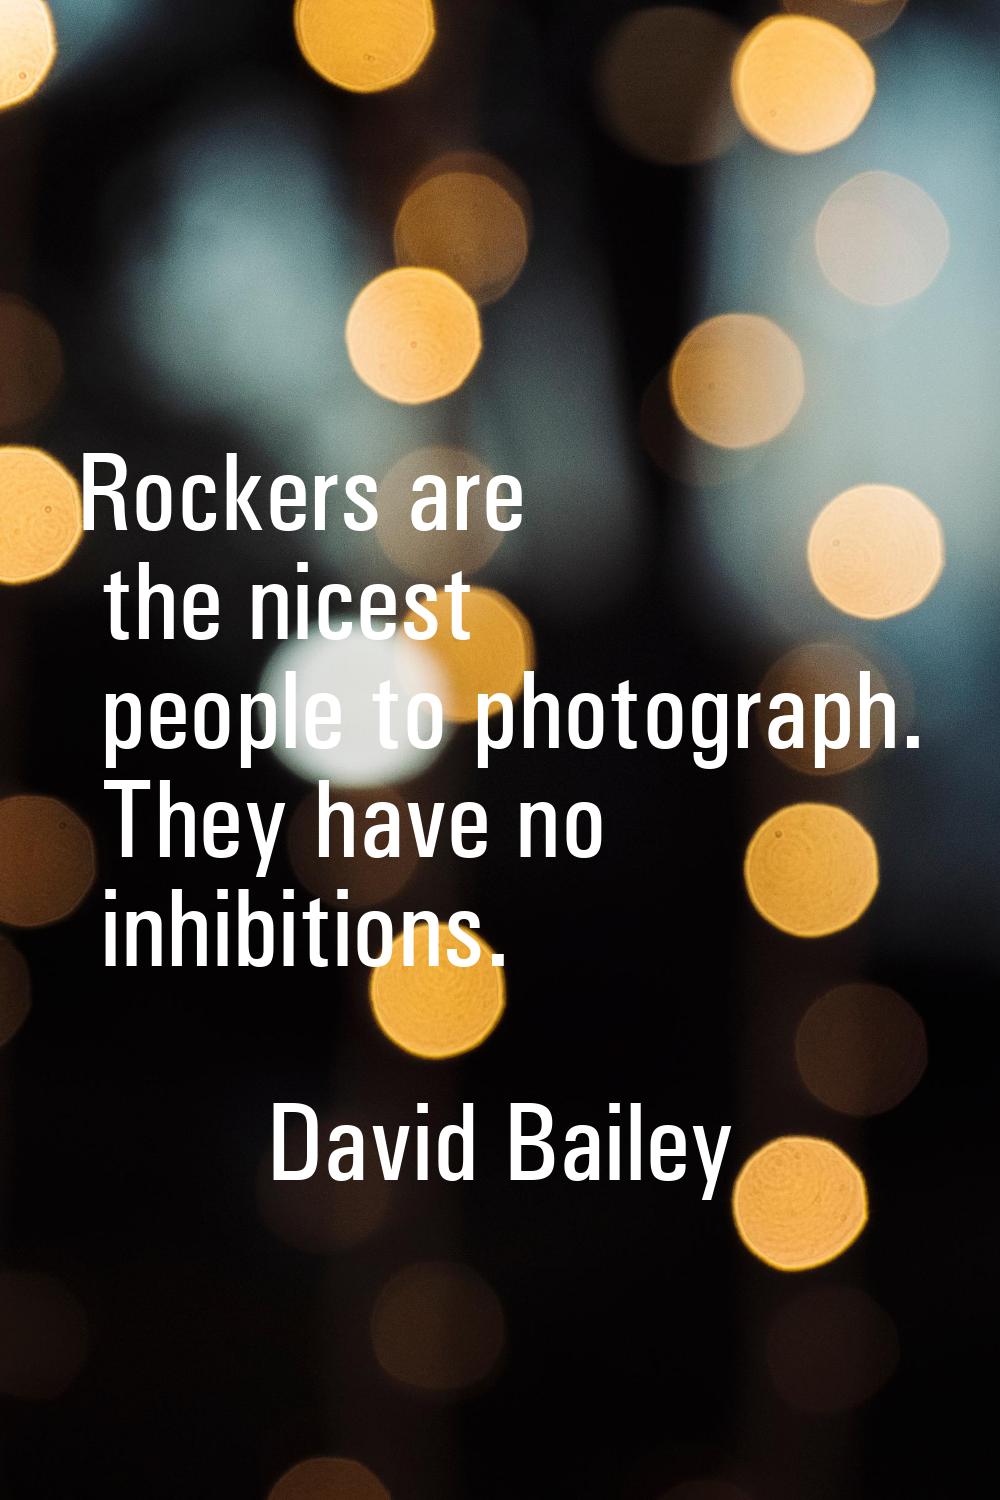 Rockers are the nicest people to photograph. They have no inhibitions.